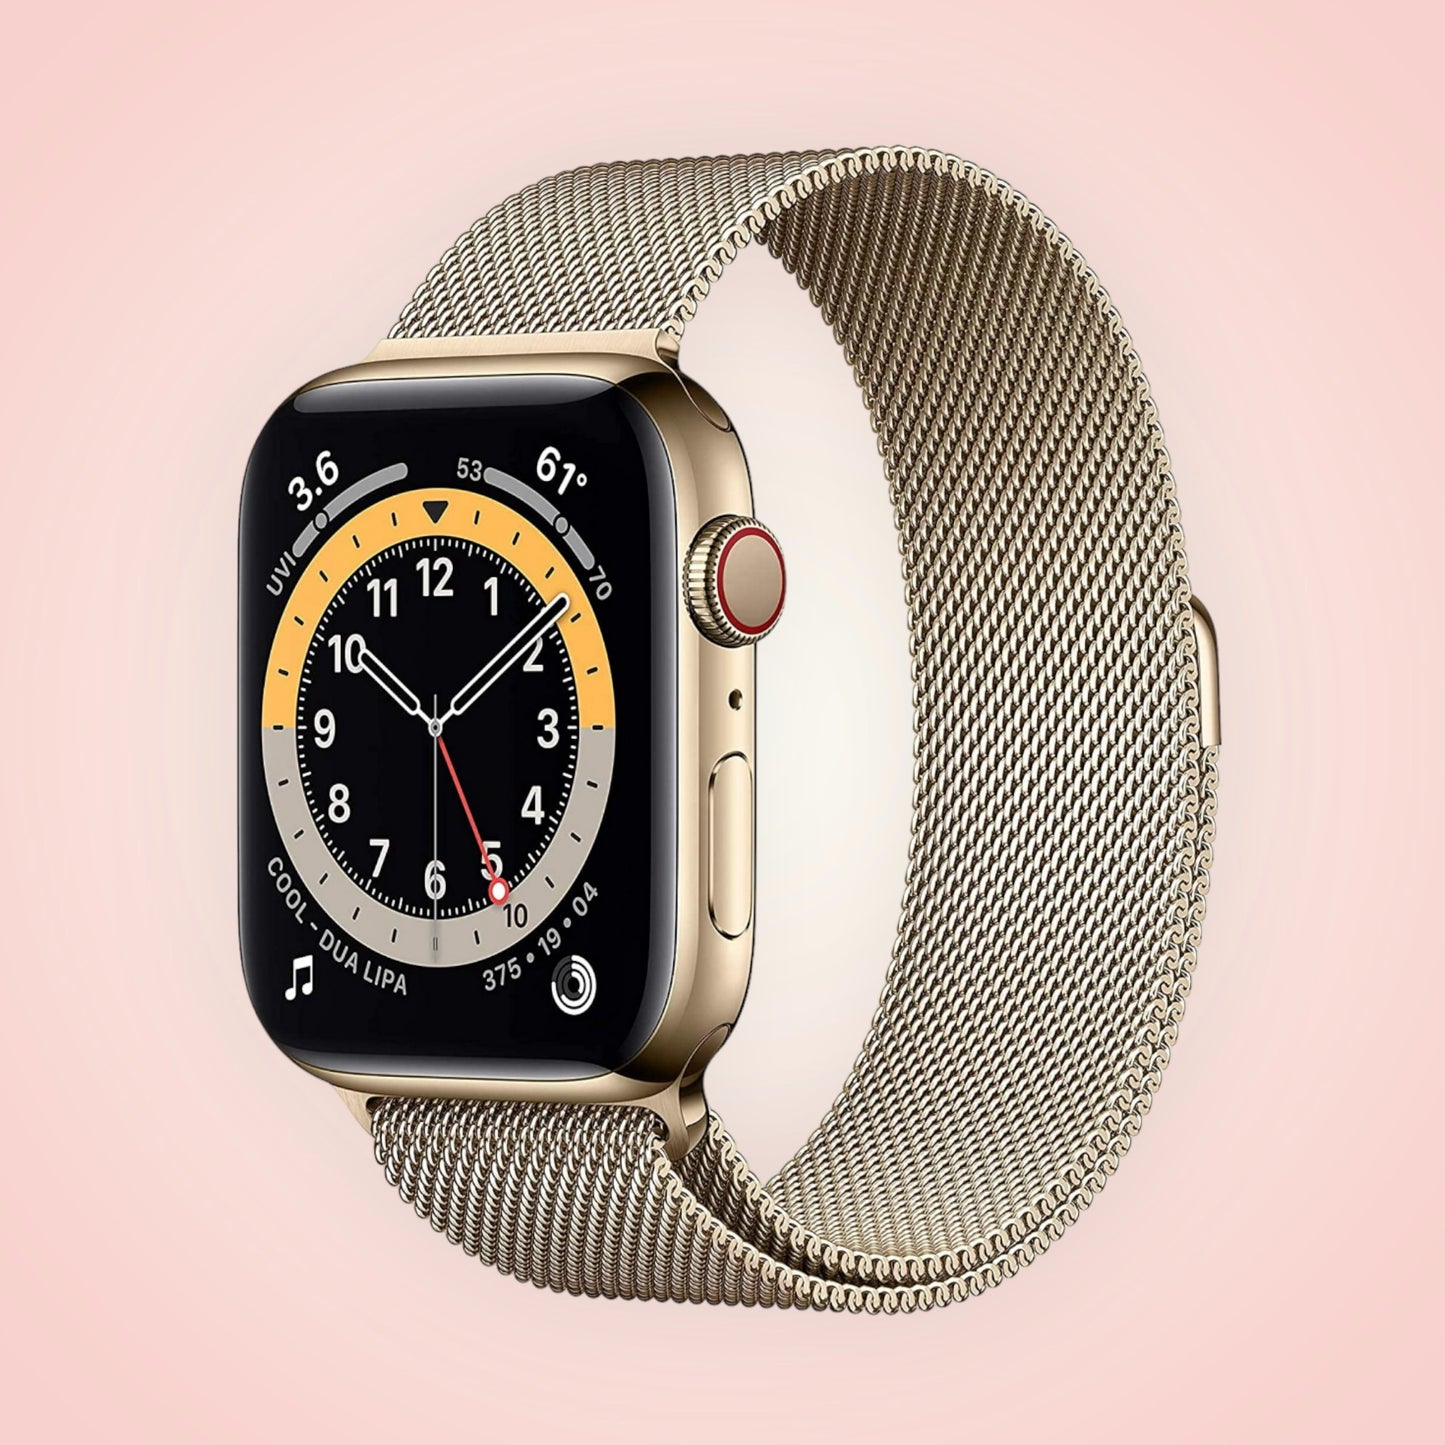 Apple Watch Series 6 - Stainless Gold - 44MM - Milanese Loop - Cellular + GPS